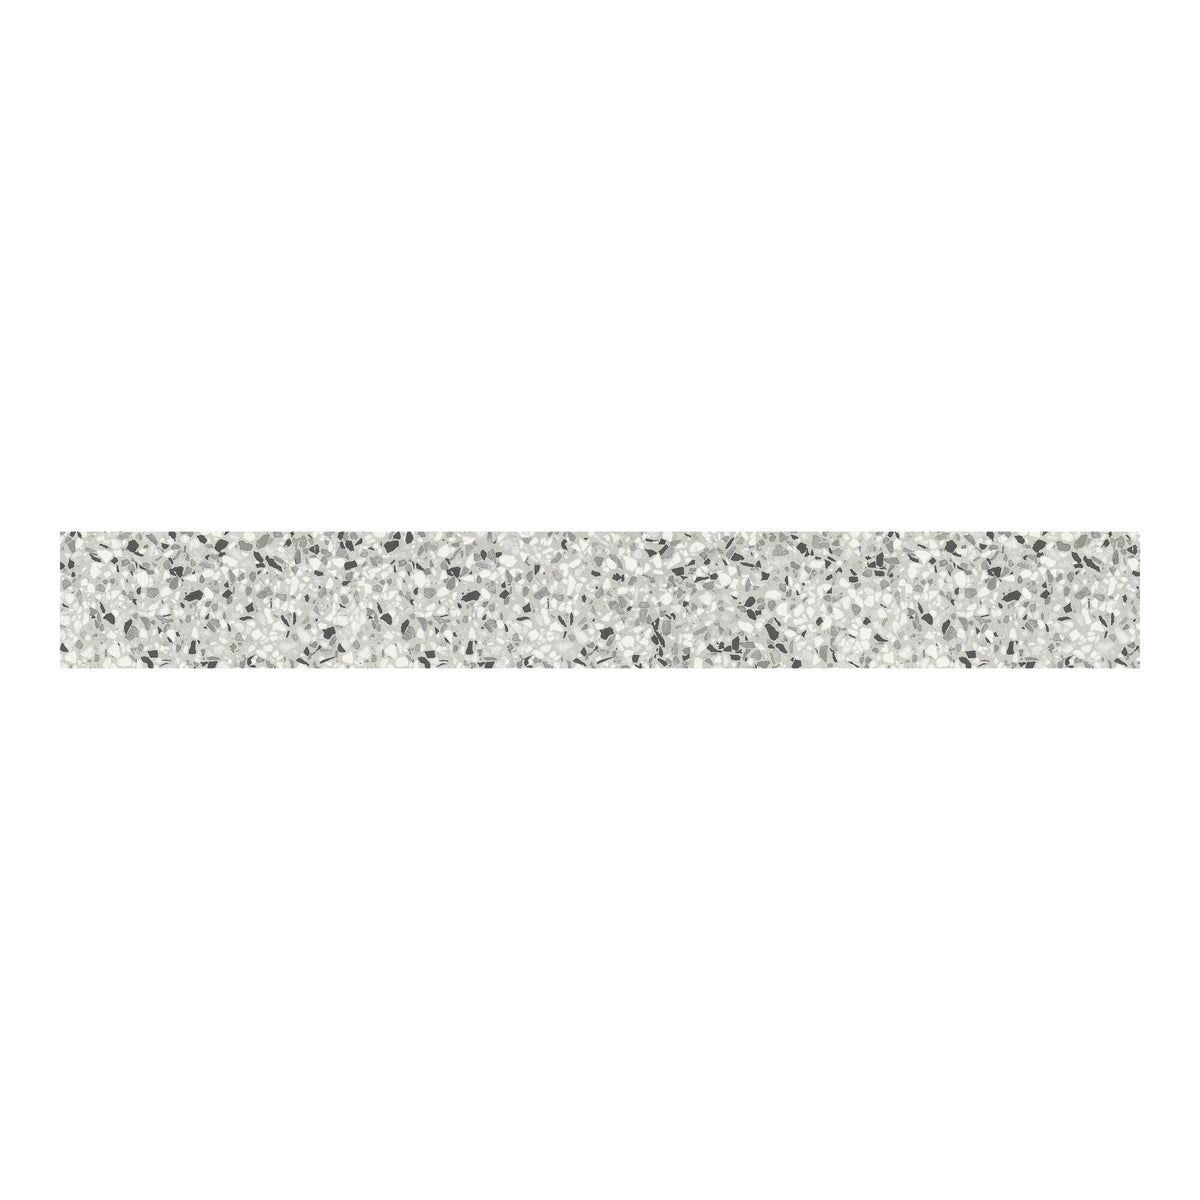 Daltile - Modernist 3 in. x 24 in. Colorbody Porcelain Bullnose - Pearsall Grey